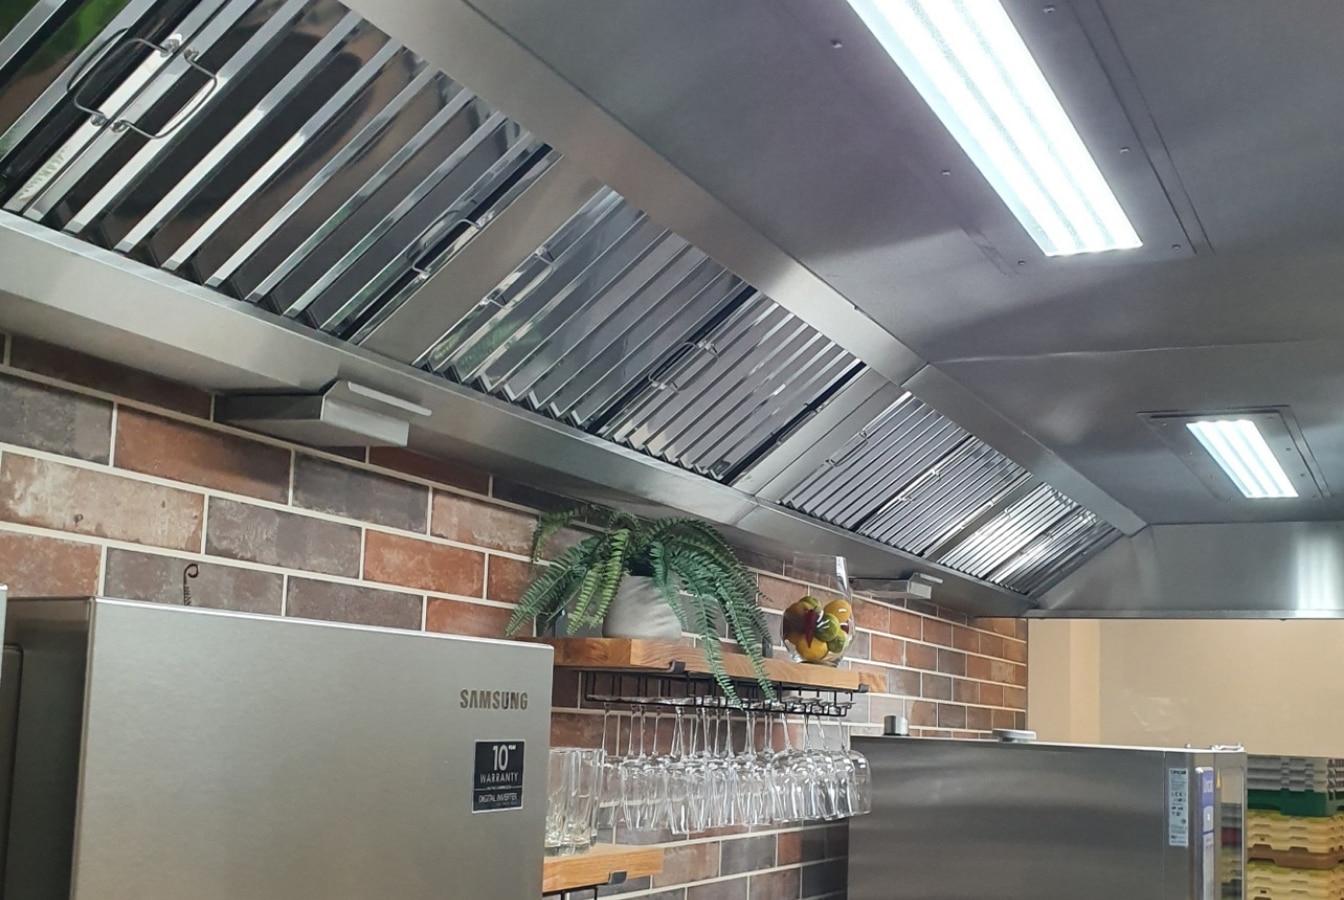 a commercial kitchen ventilations system in situ